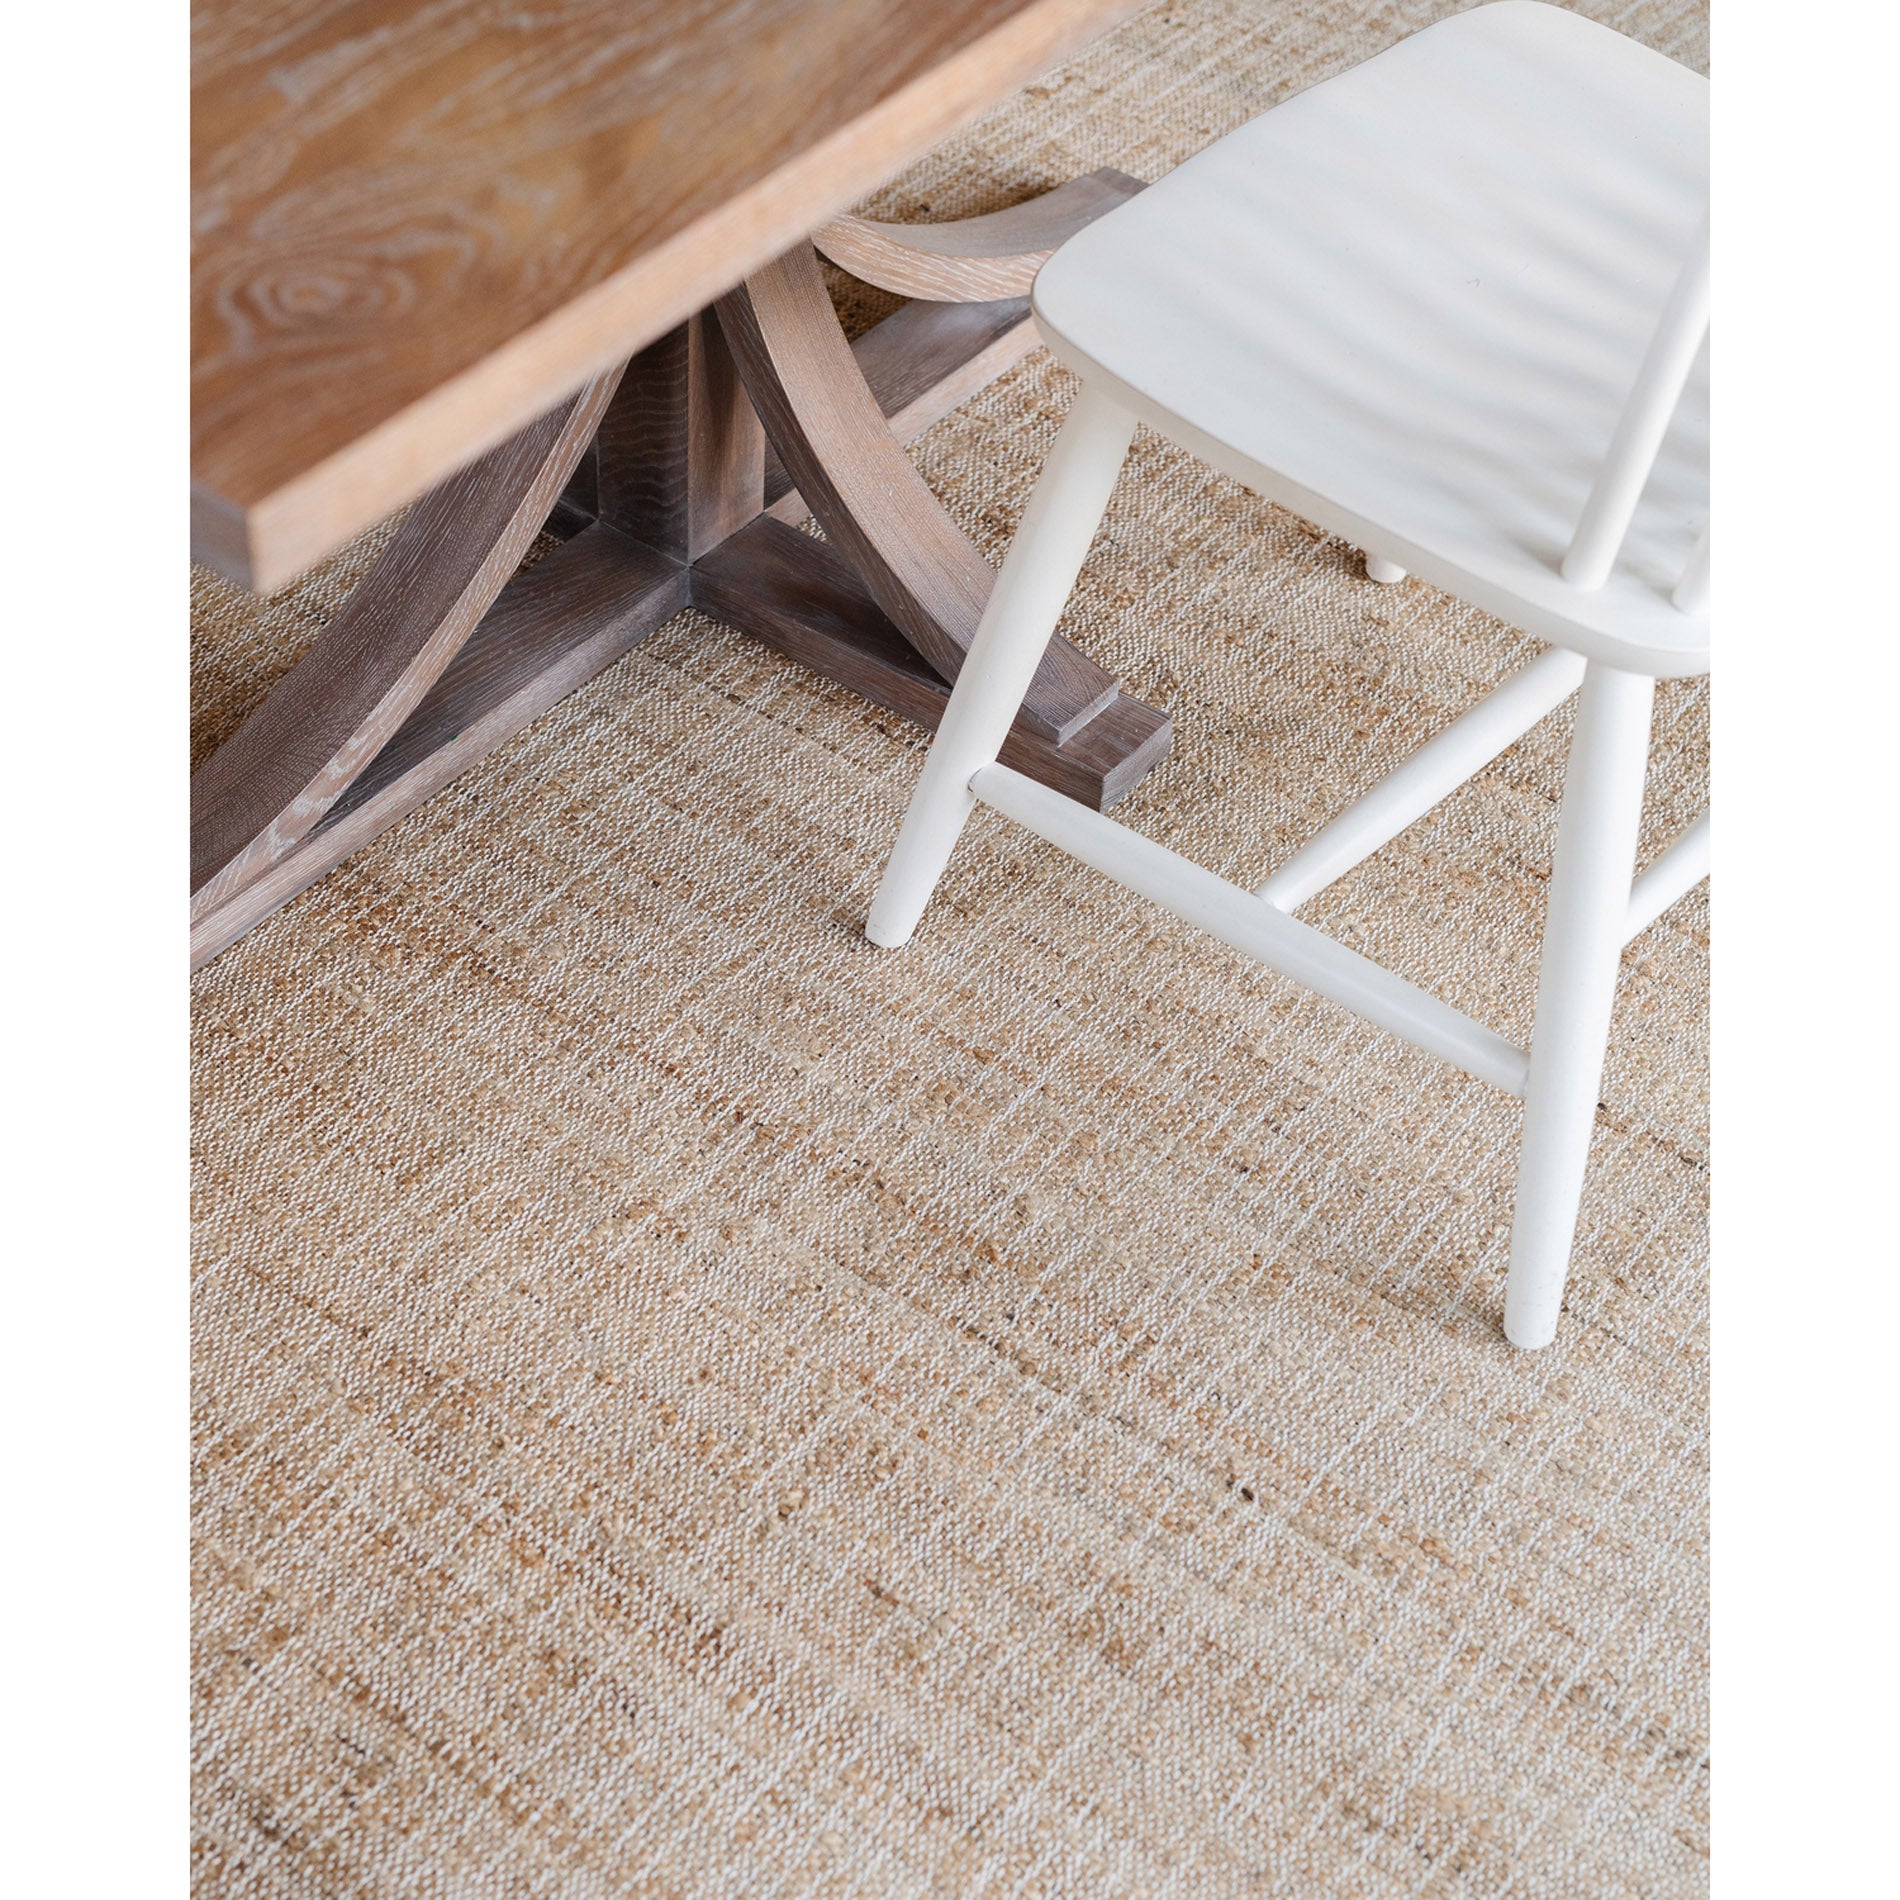 Erin Gates by Momeni Orchard Ripple Natural Hand Woven Wool and Jute Area Rug